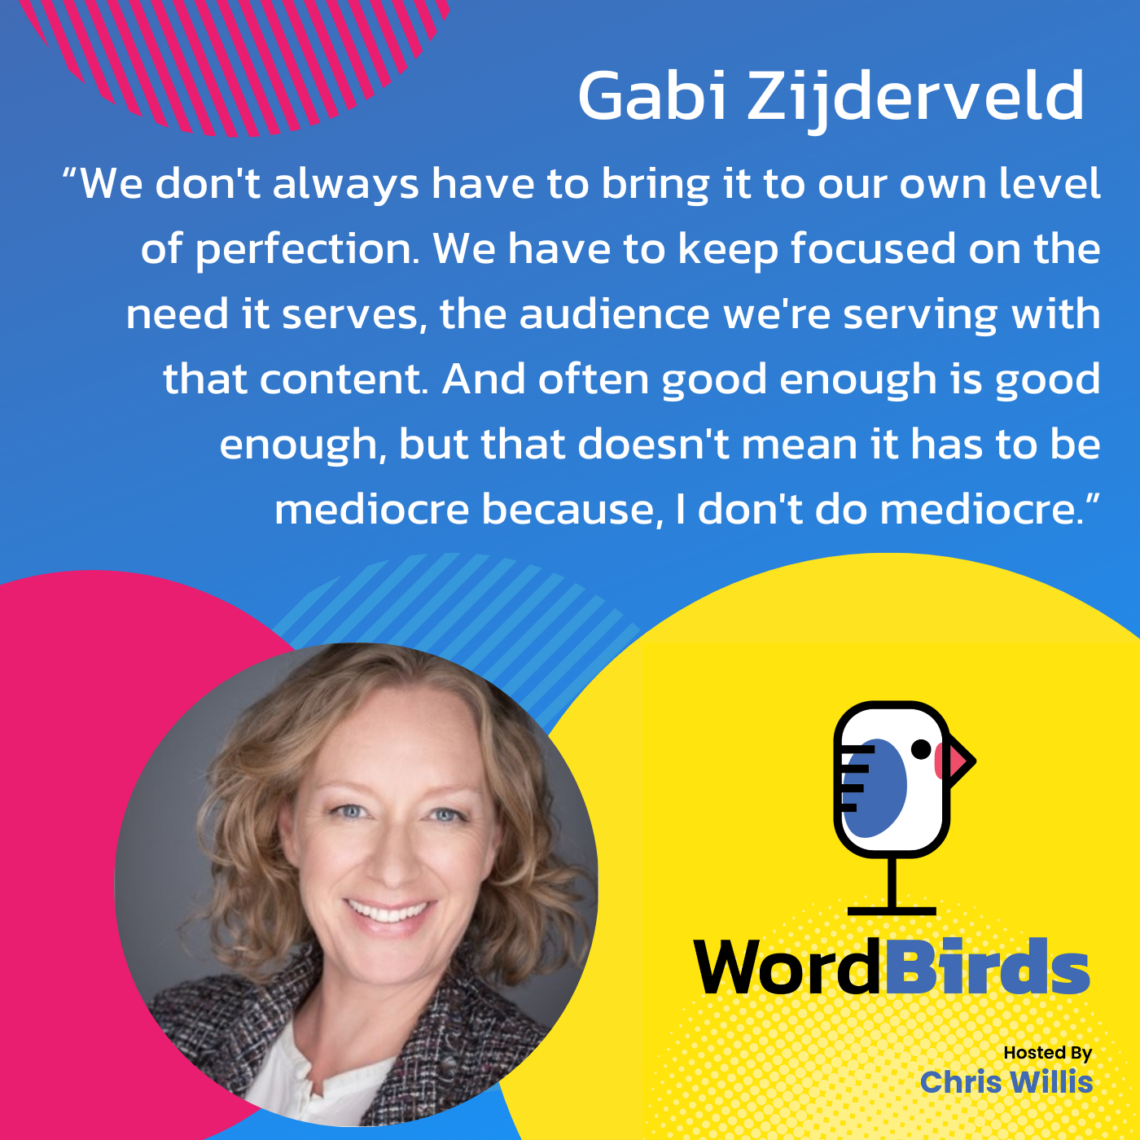 On a blue background there's a quote from Gabi Zijderveld in white that takes up the majority of the image. The bottom of the image has a headshot image of Gabi and the WordBirds Podcast logo.